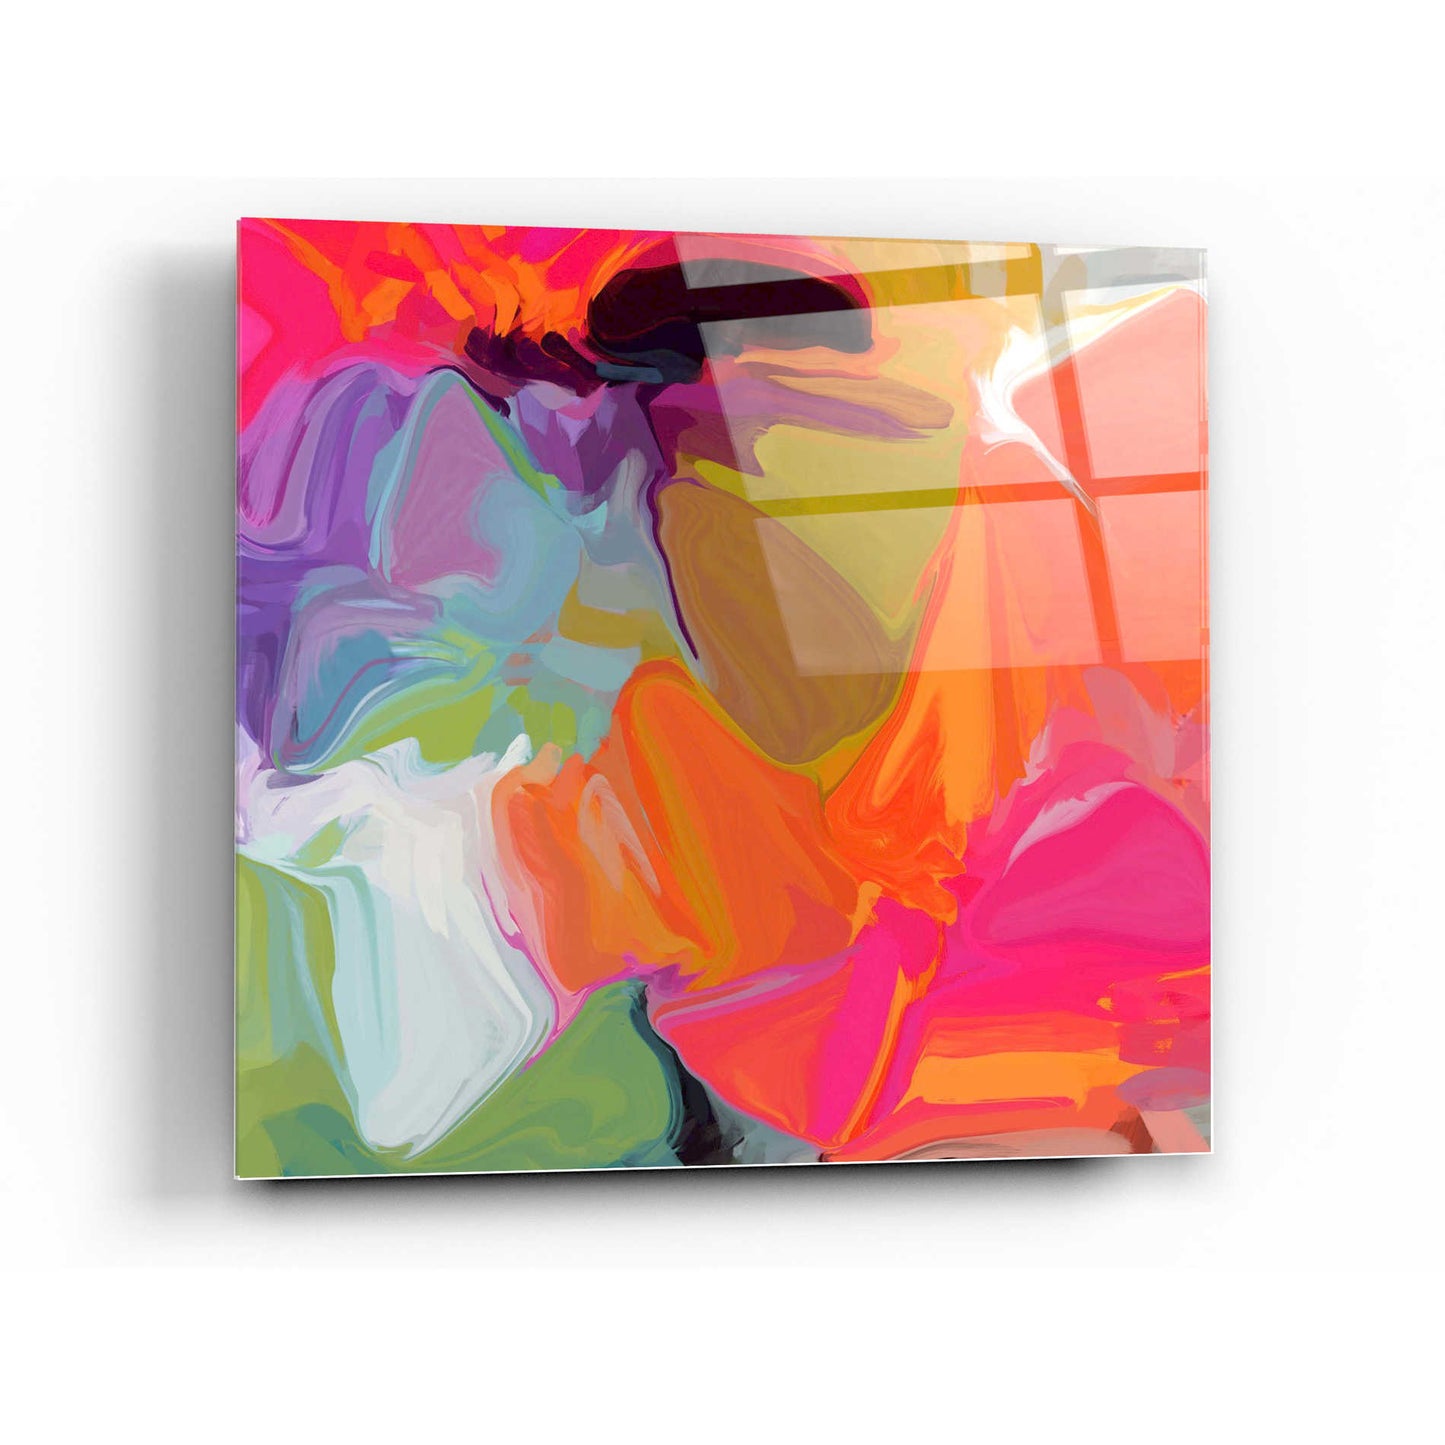 Epic Art 'Color Vibrations 2' by Irena Orlov, Acrylic Glass Wall Art